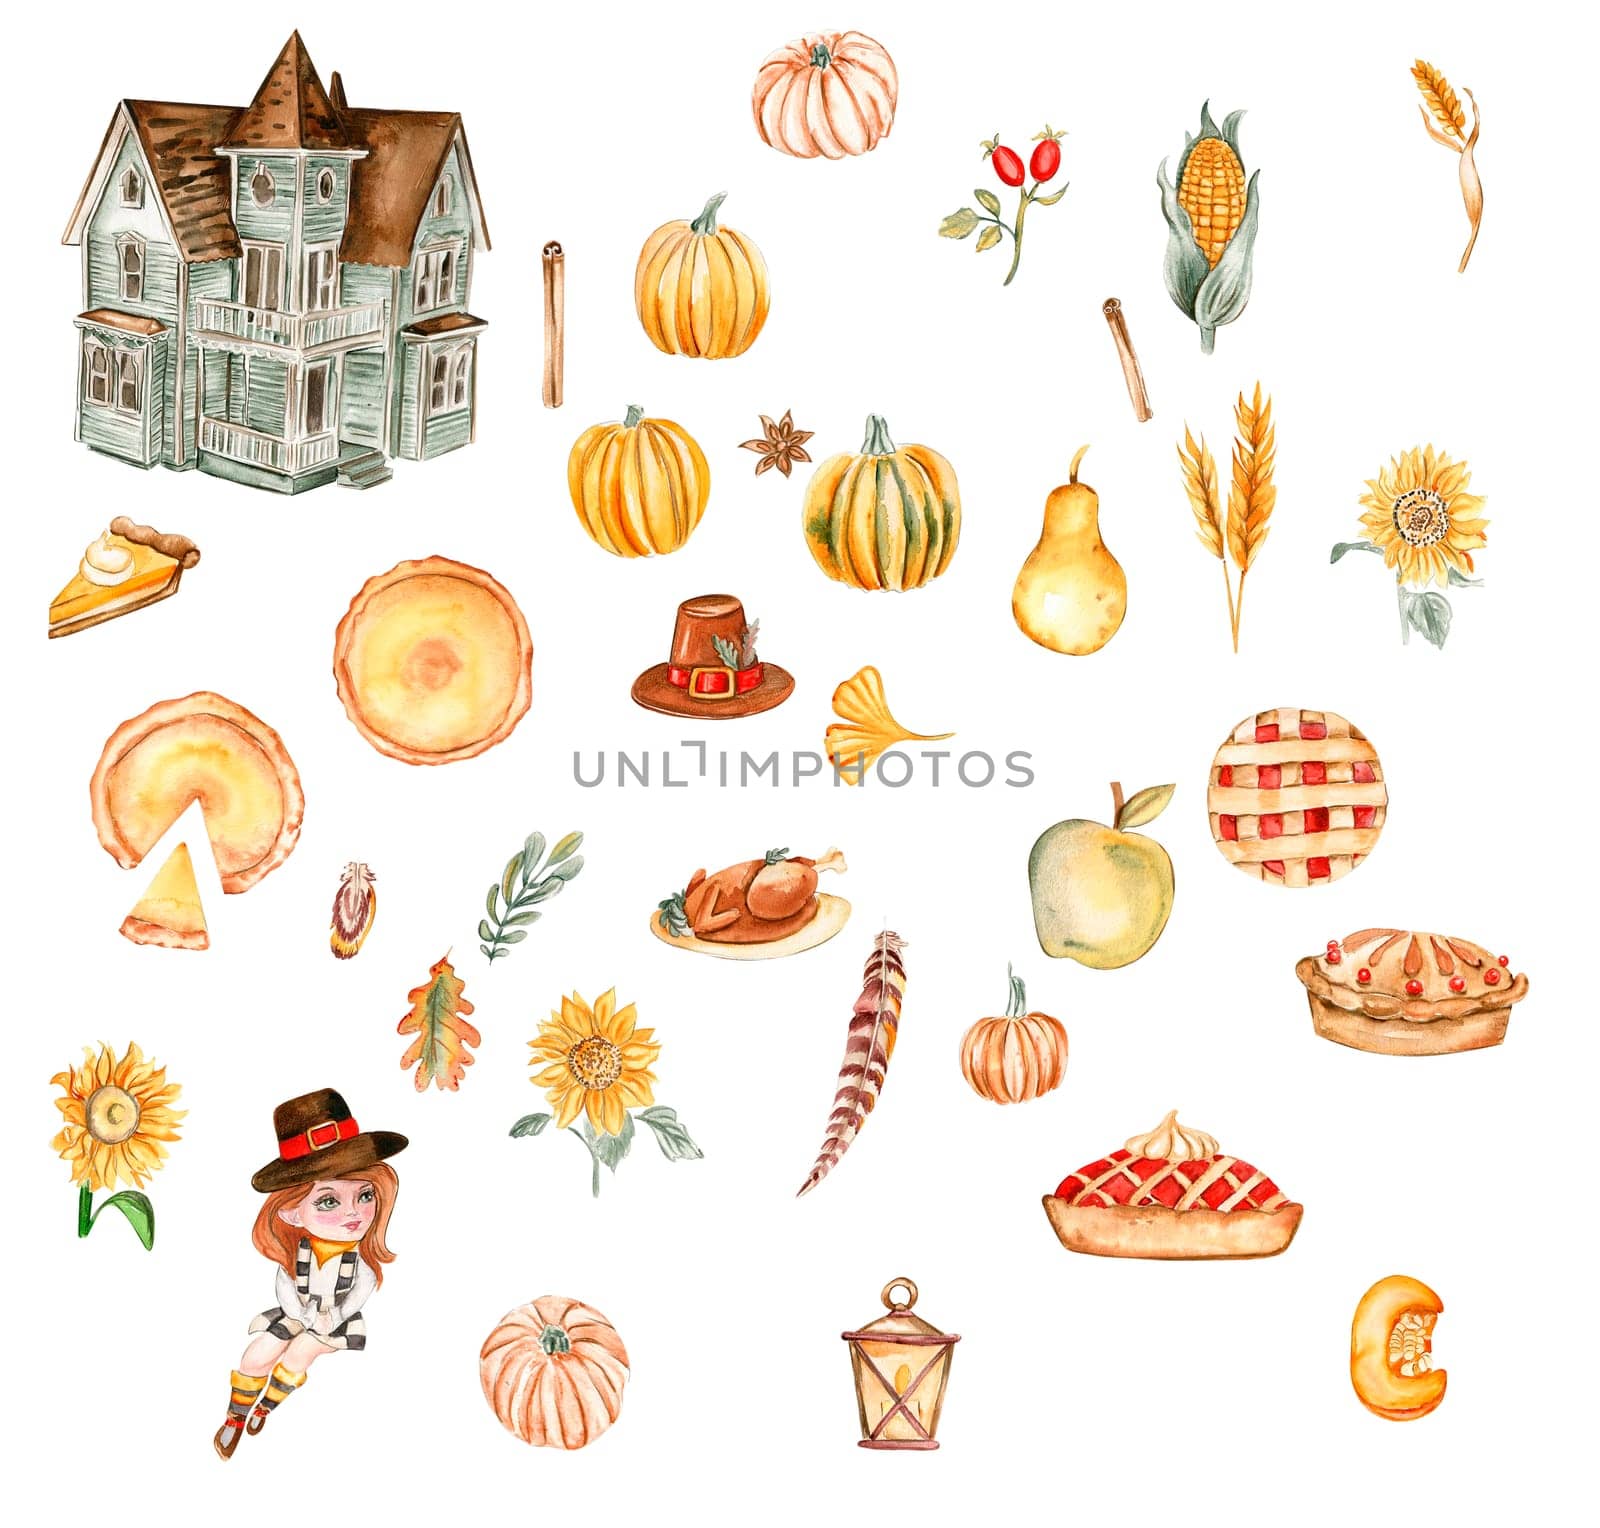 Watercolor hand drawn autumn farm house,pumpkins and cakes. Hand drawn illustration of thanksgiving day . Perfect for scrapbooking, kids design, wedding invitation, posters, greetings cards, party decoration.